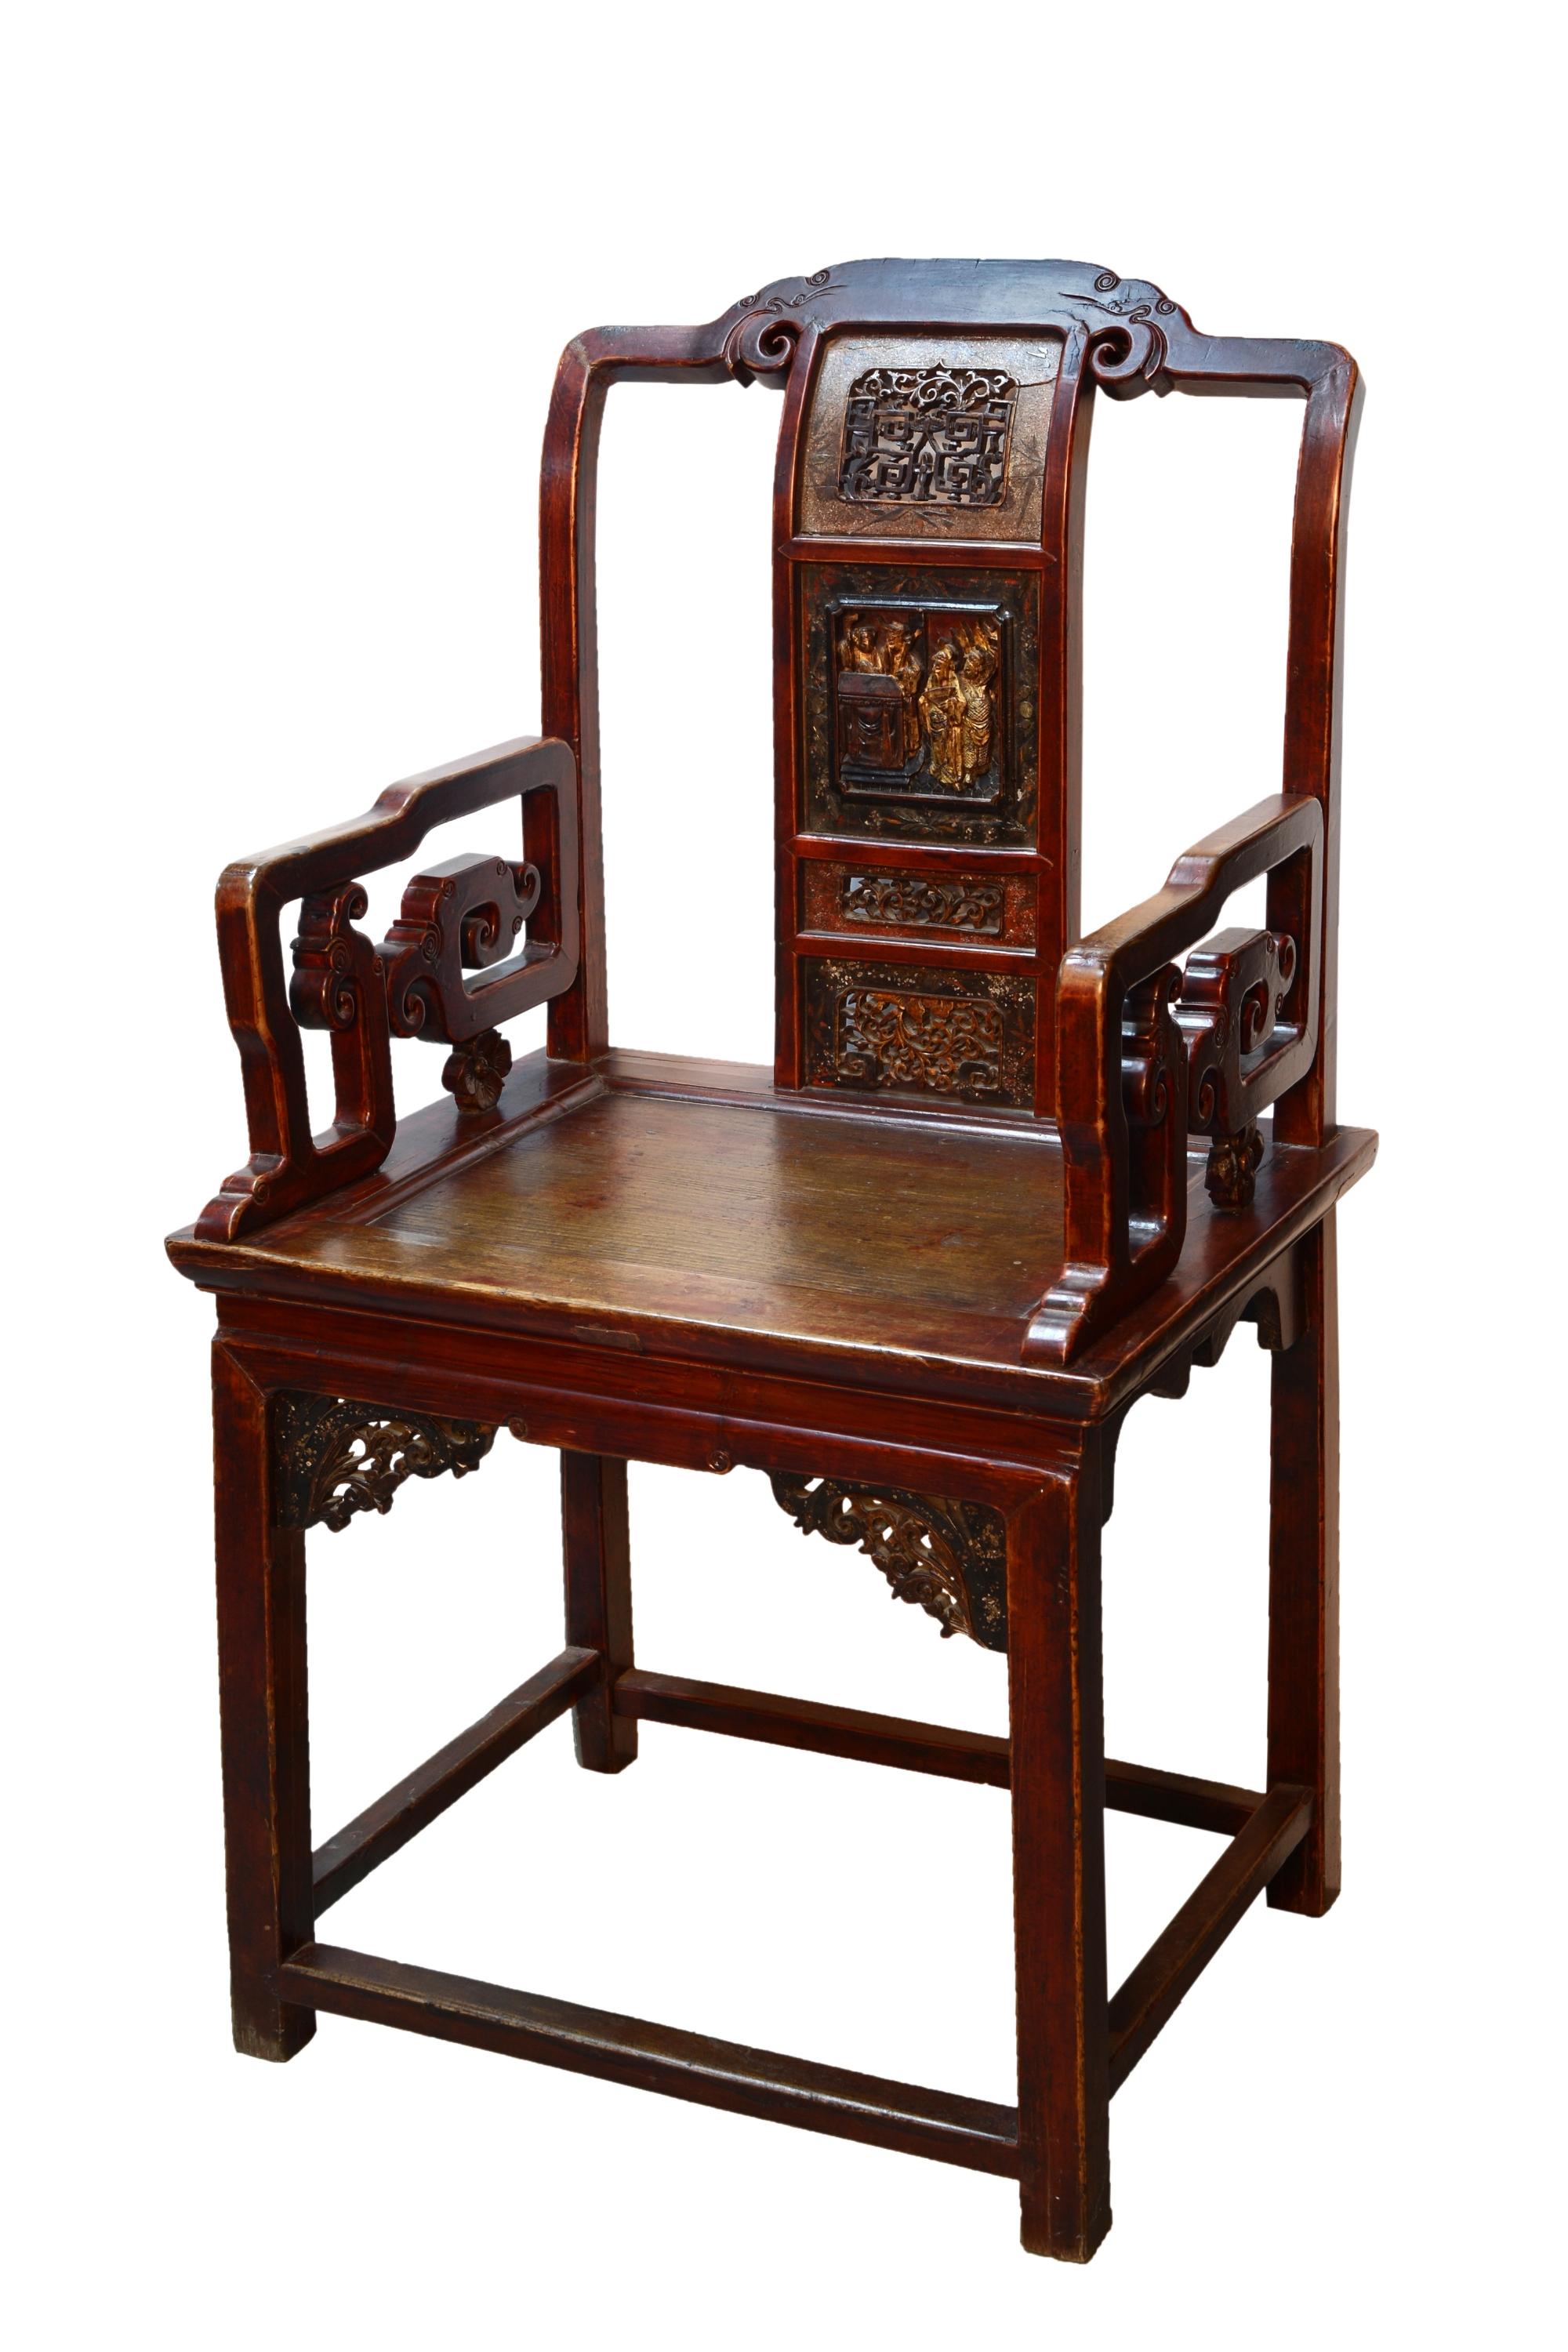 4 pieces set.
High back chair and arms made of lacquered wood decorated with traditional Chinese-inspired carvings. Note the lacquered compositions on the chambranas in the front, the shape of the legs, arms and backrest, the decorations of